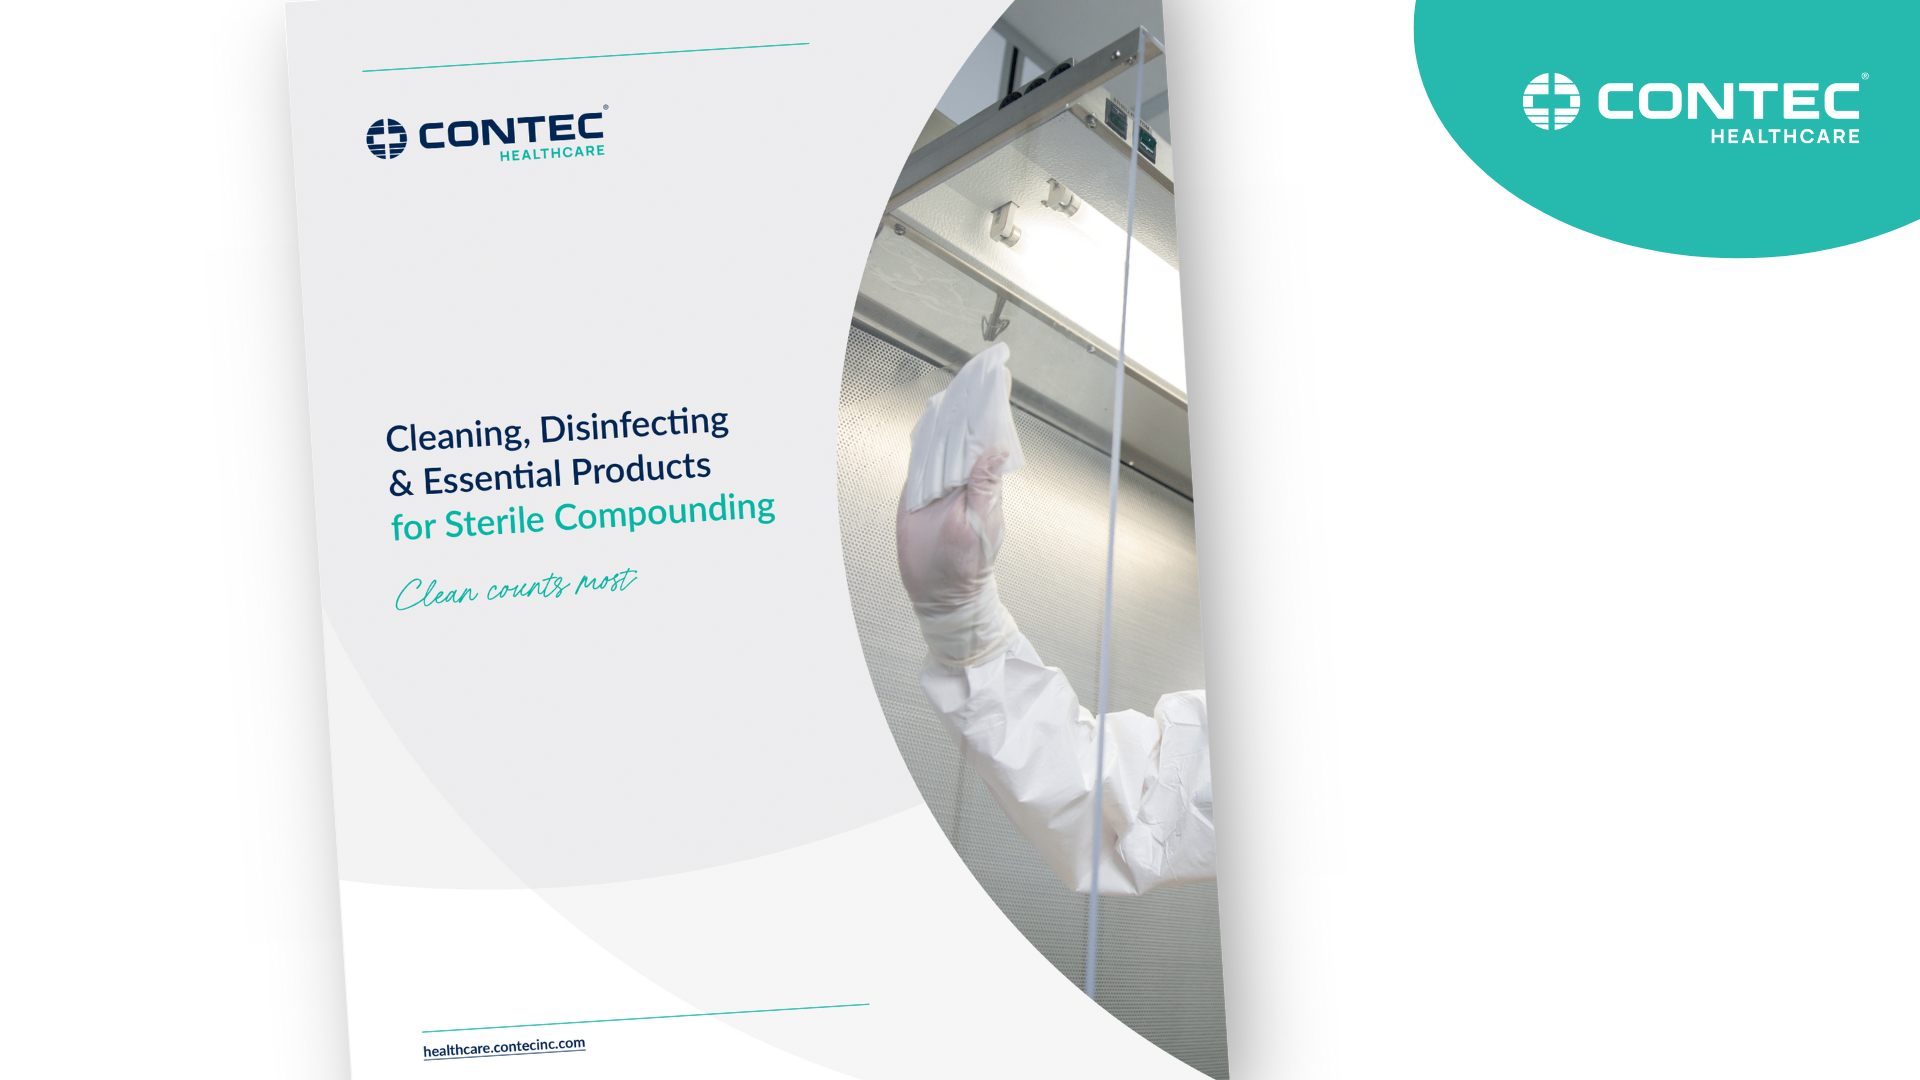 Image of Cleaning, Disinfecting & Essential Products for Sterile Compounding